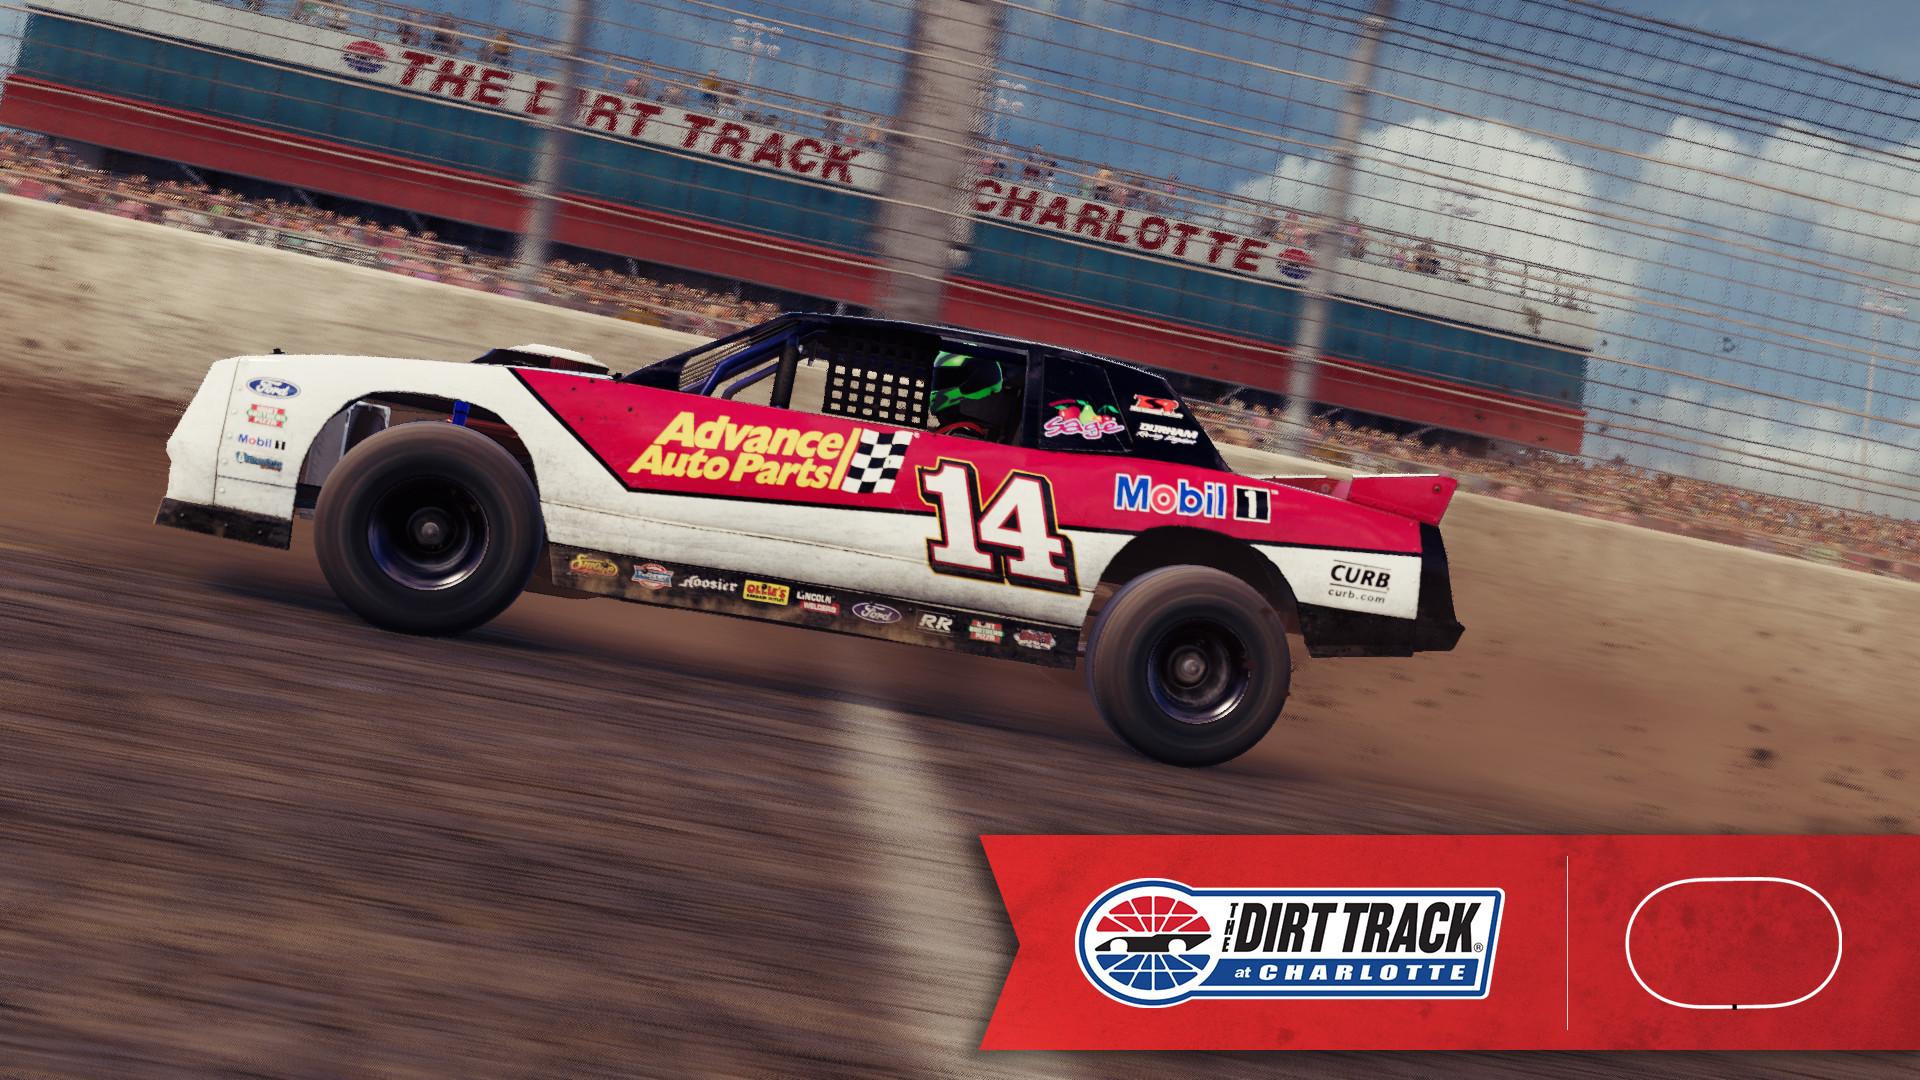 Tony Stewart's All-American Racing: The Dirt Track at Charlotte Featured Screenshot #1